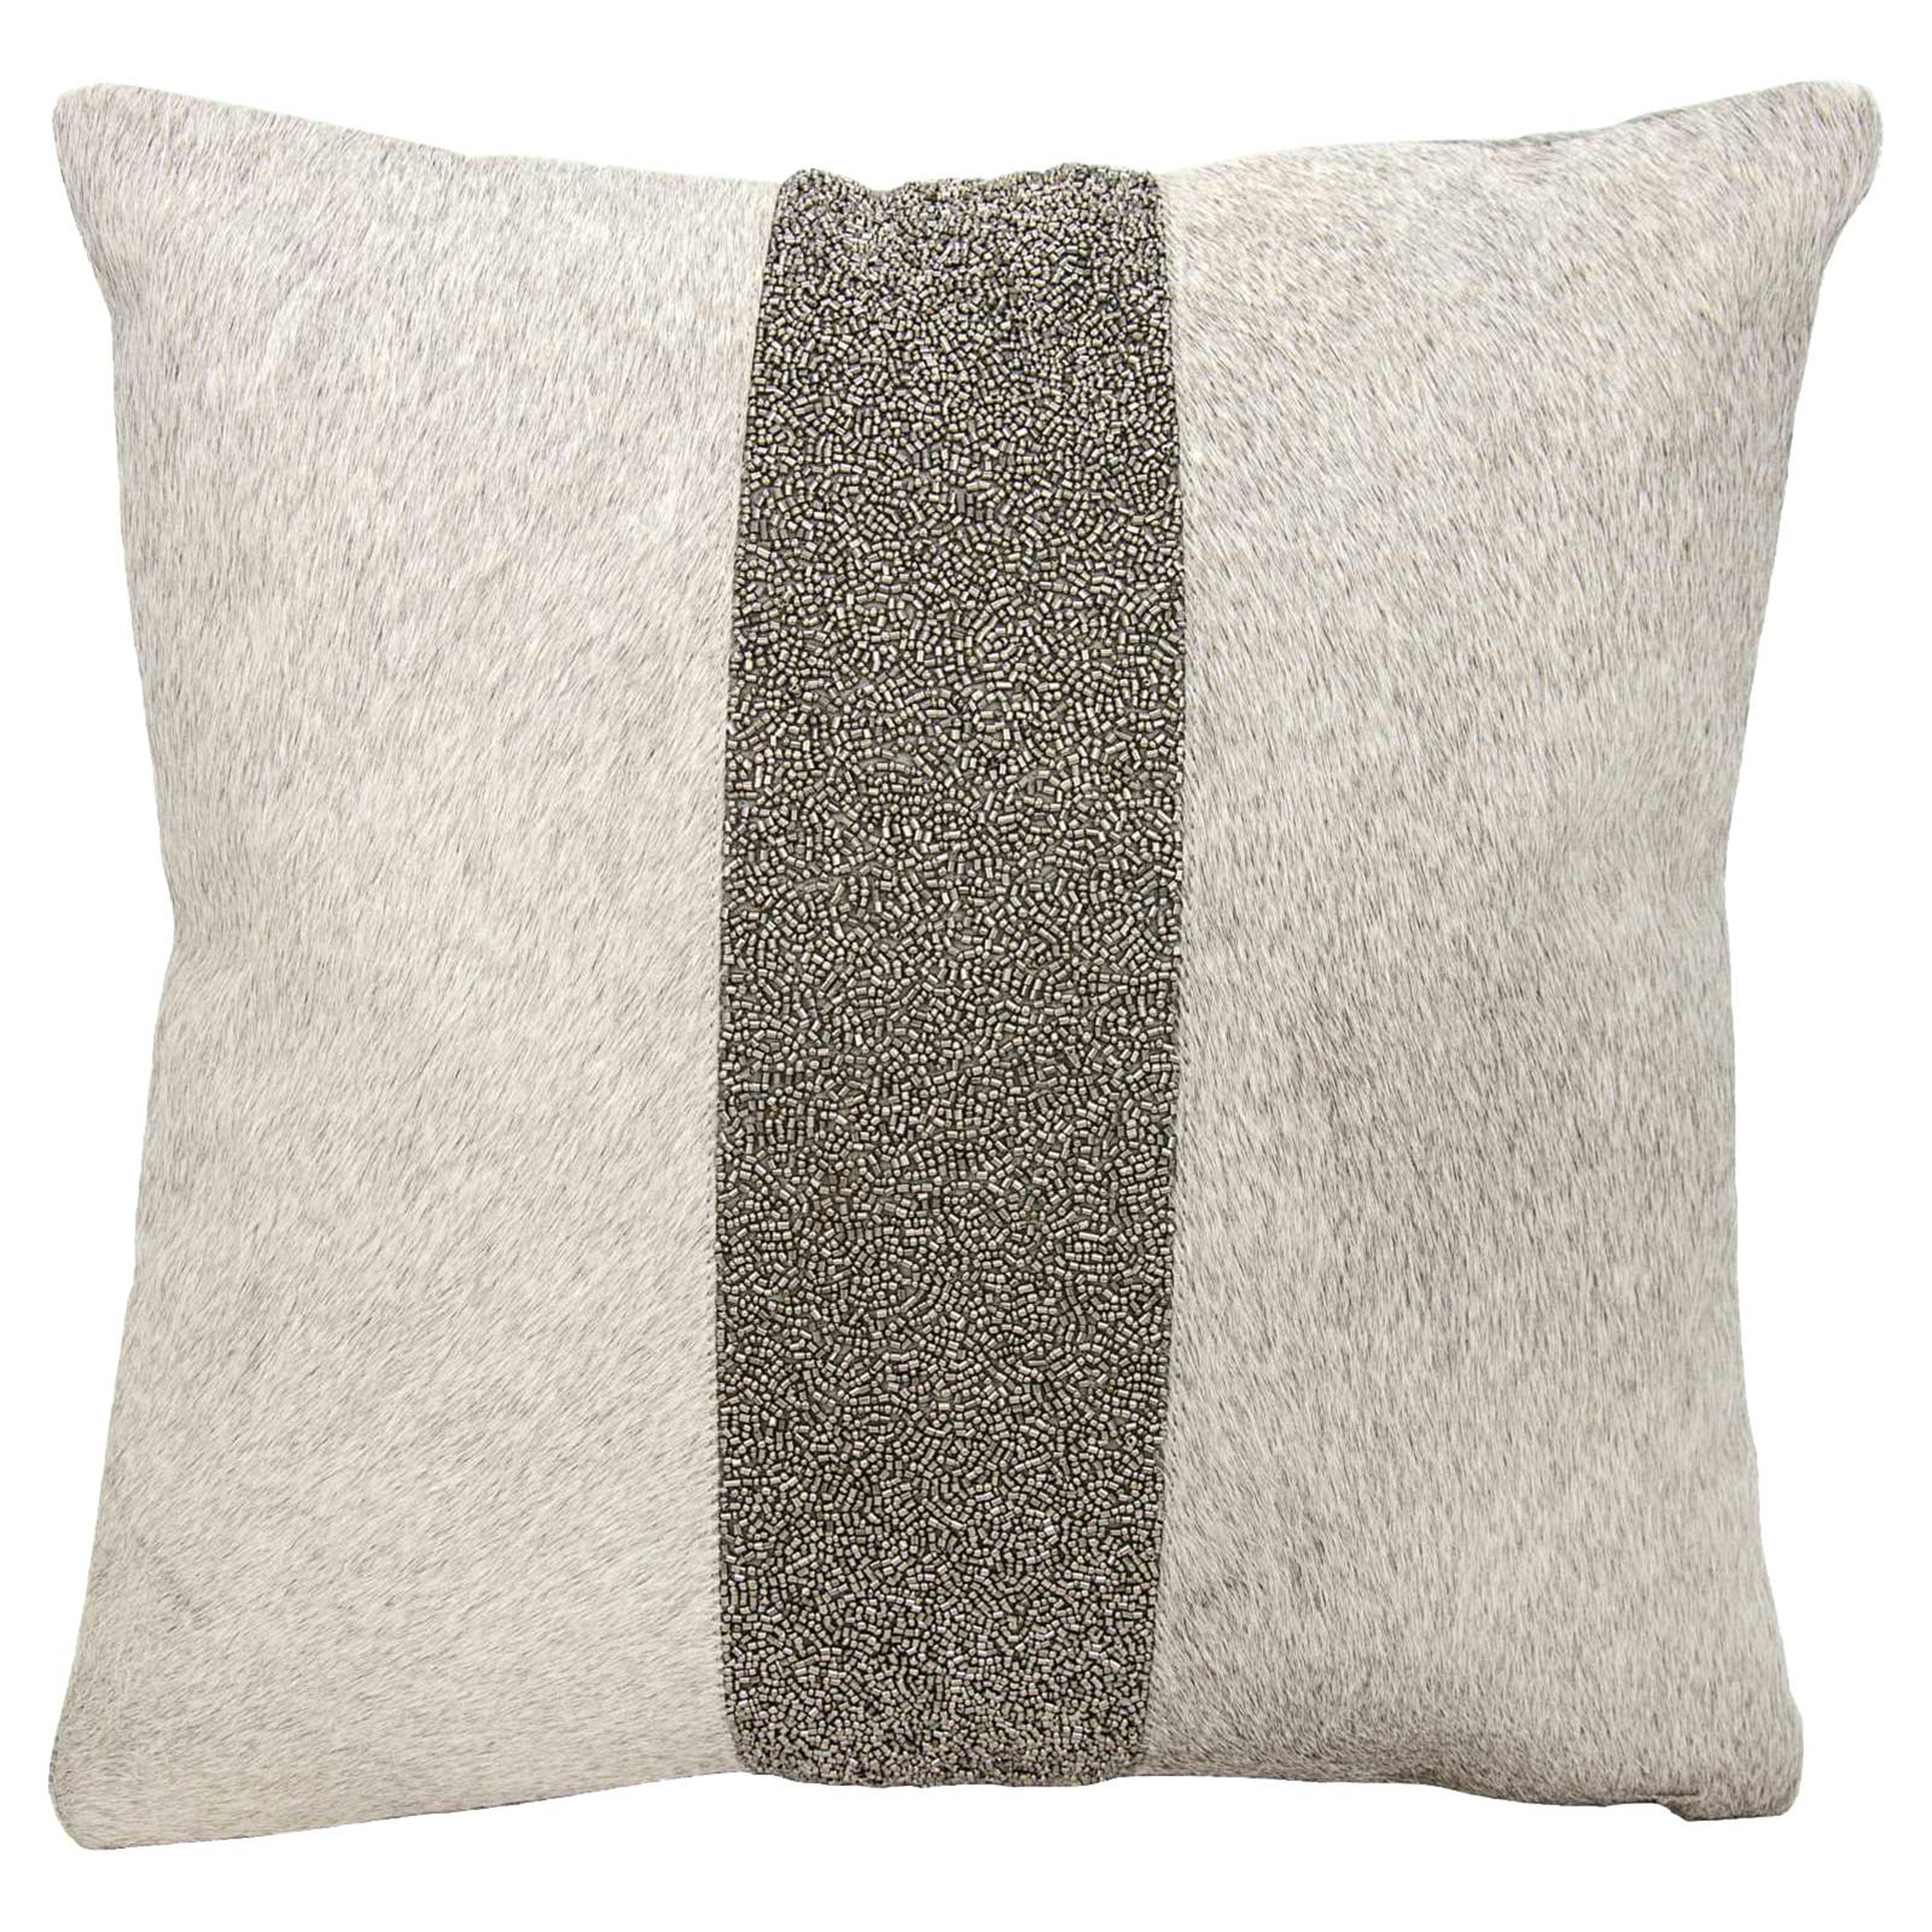 Joan Hollywood Regency Shimmer Stripe Grey Pewter Hide Pillow - 18x18 - Kathy Kuo Home